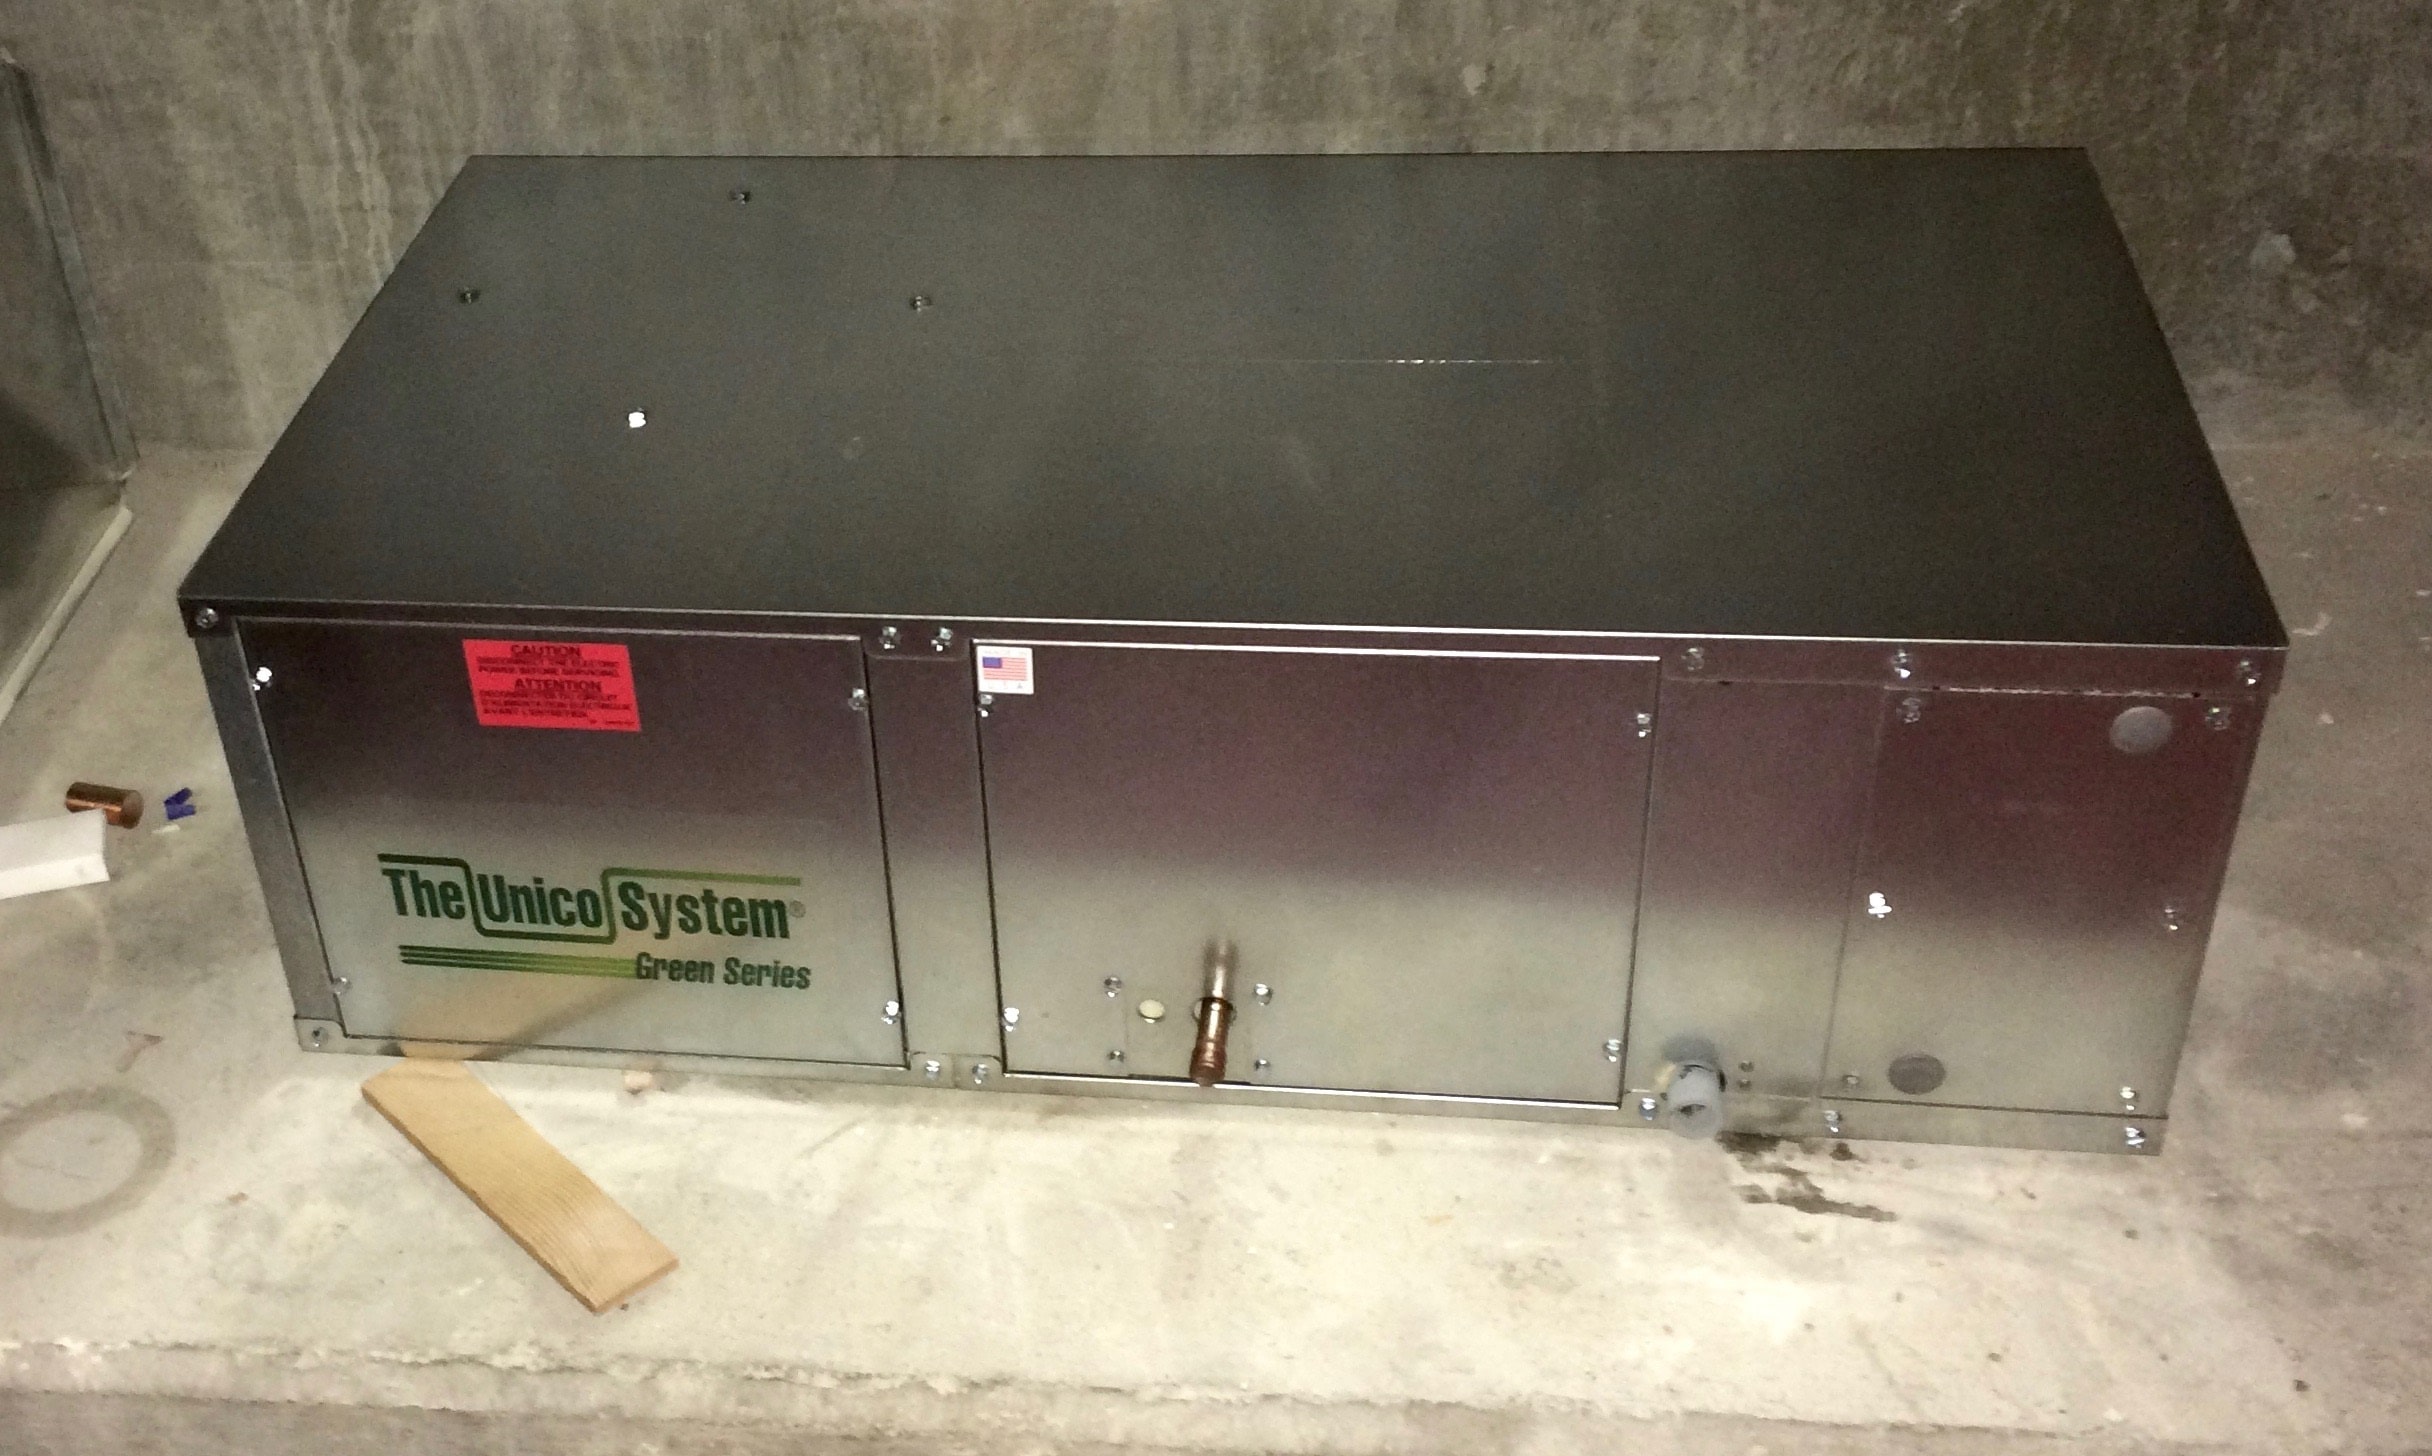 Click to read more about the project where this unit was installed!